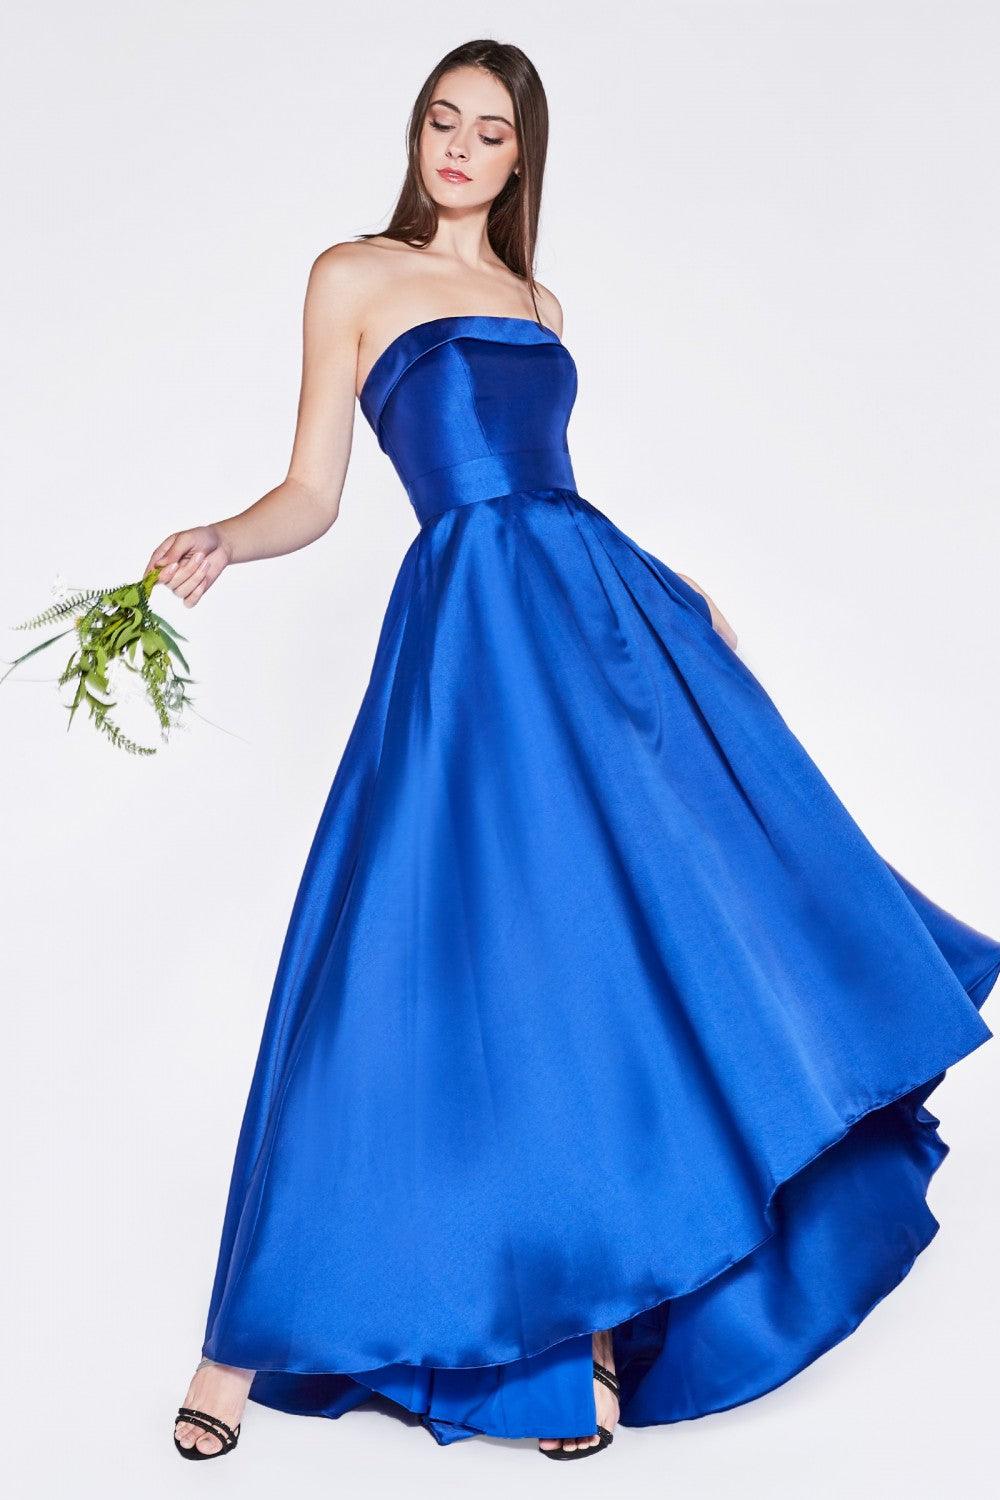 Strapless Long Prom Dress Evening Gown - The Dress Outlet Cinderella Divine